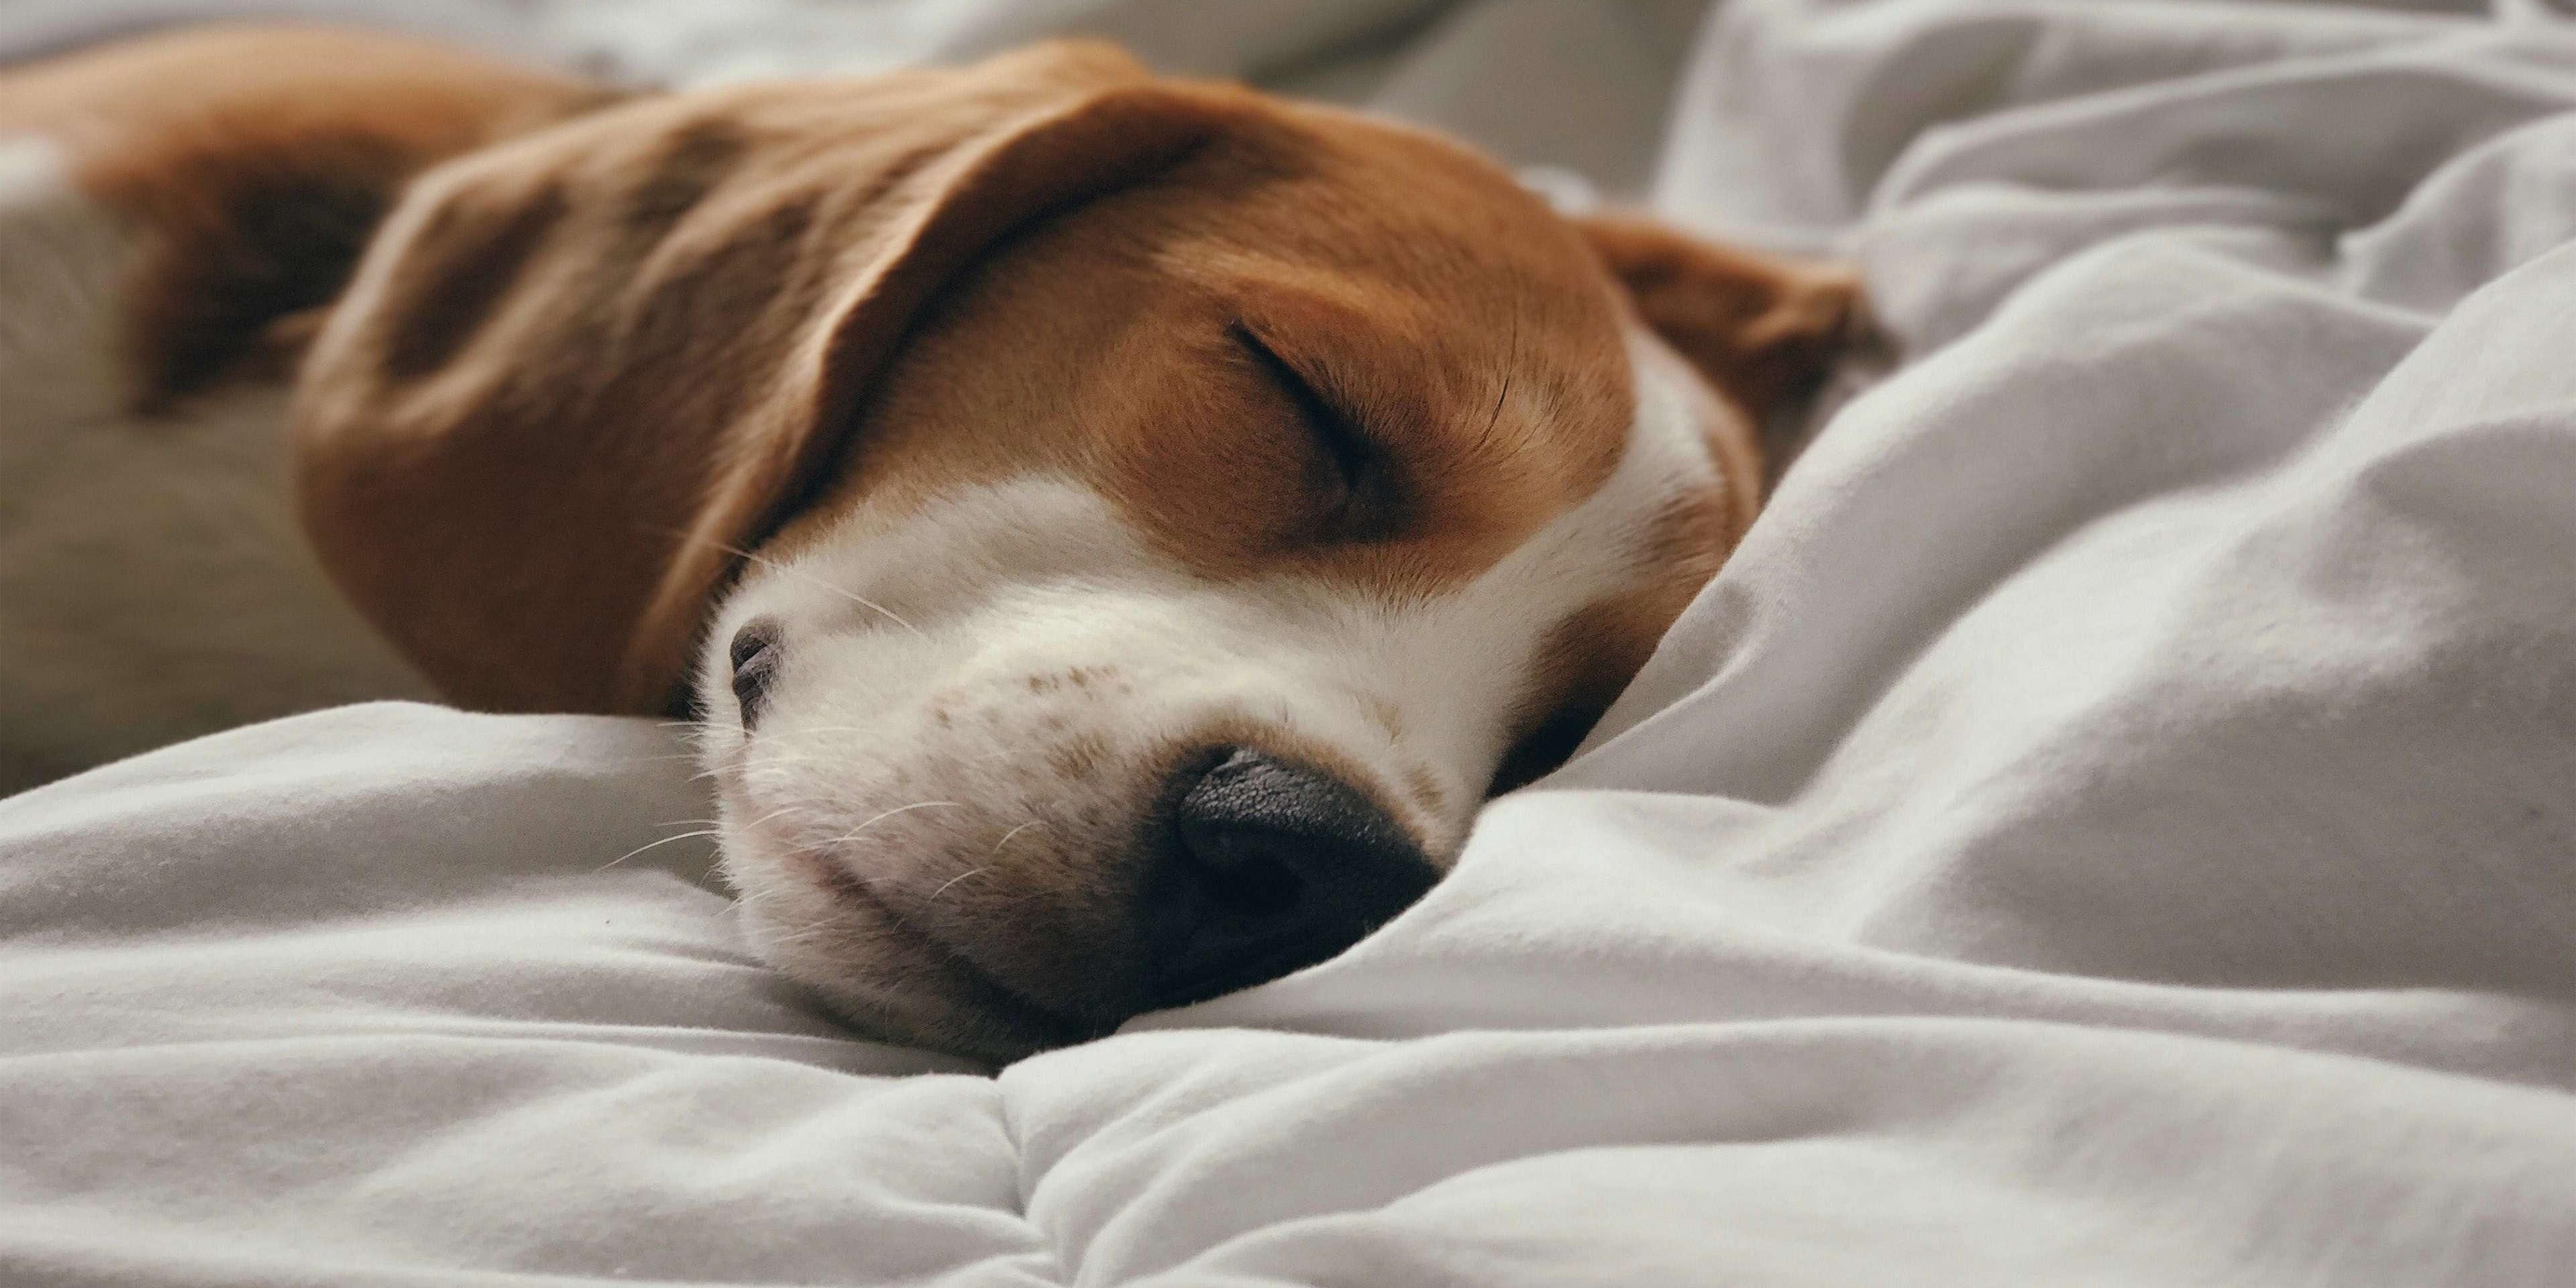 It’s hard to leave your best buddy at home when you’re traveling. At Holiday Inn Express, we provide a pet friendly experience. In order to accommodate guests not traveling with a four-legged friend, restrictions do apply. After booking online, call the property directly (813-854-5080 ext. 3) and ask them to add your pet to your reservation.